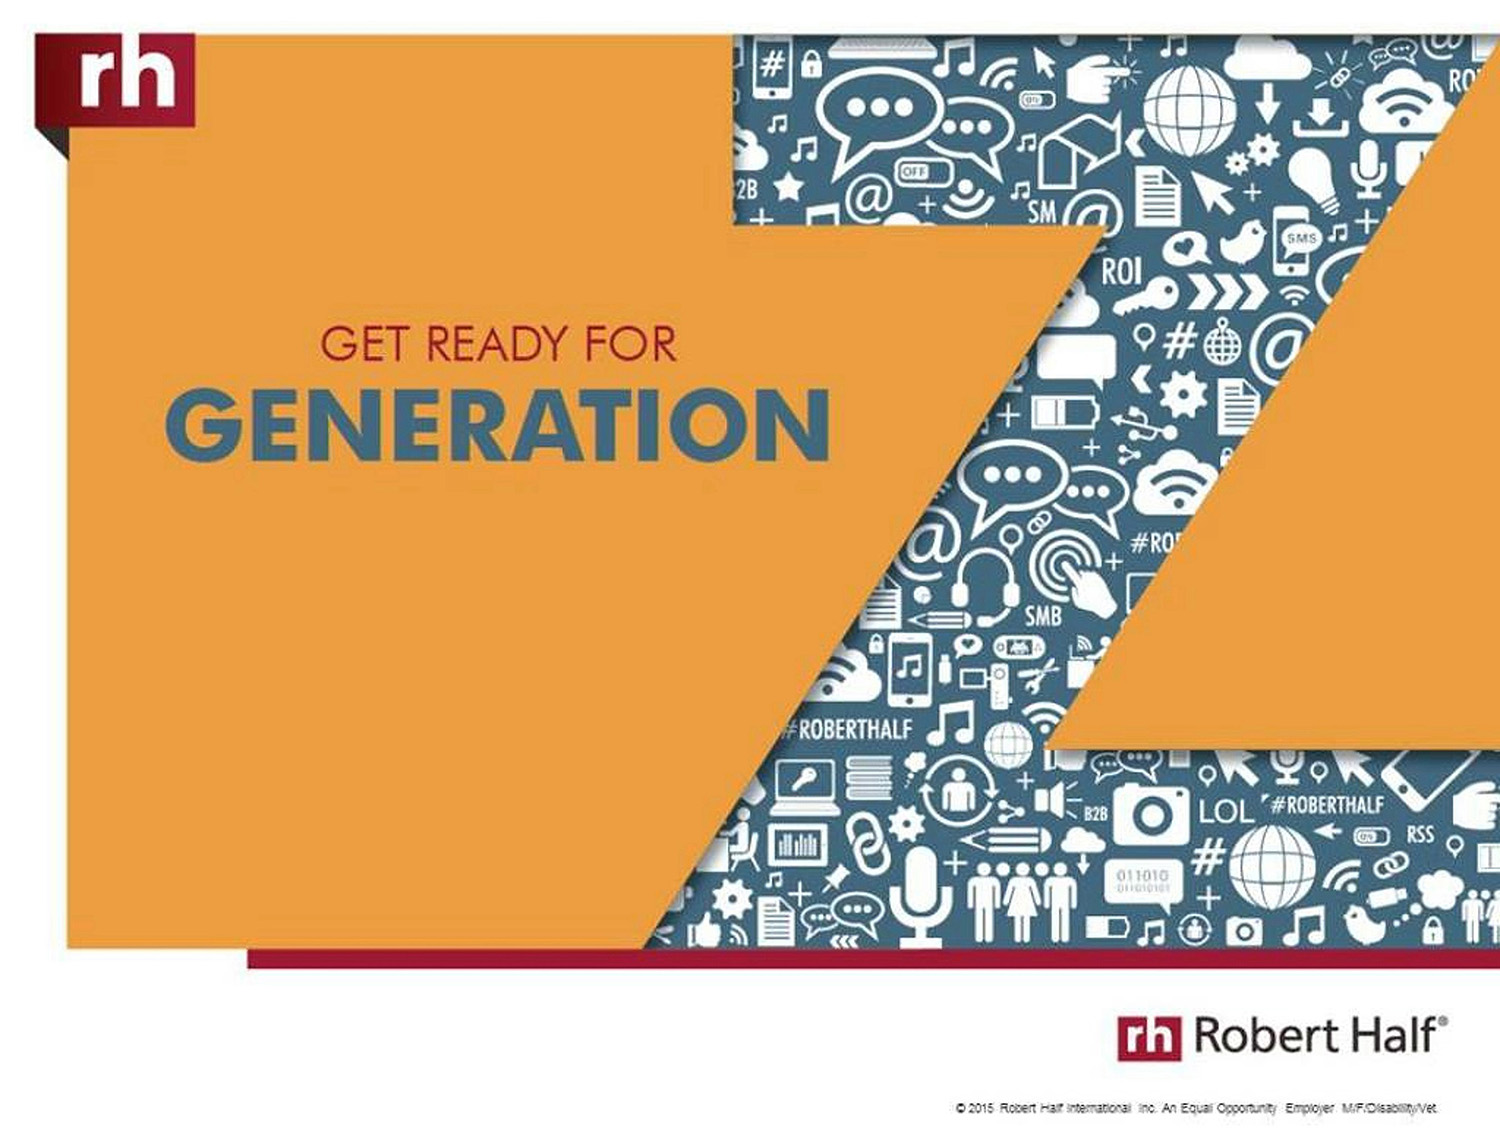 Get ready for Gen Z in the office! Visit roberthalf.com/generation-z.